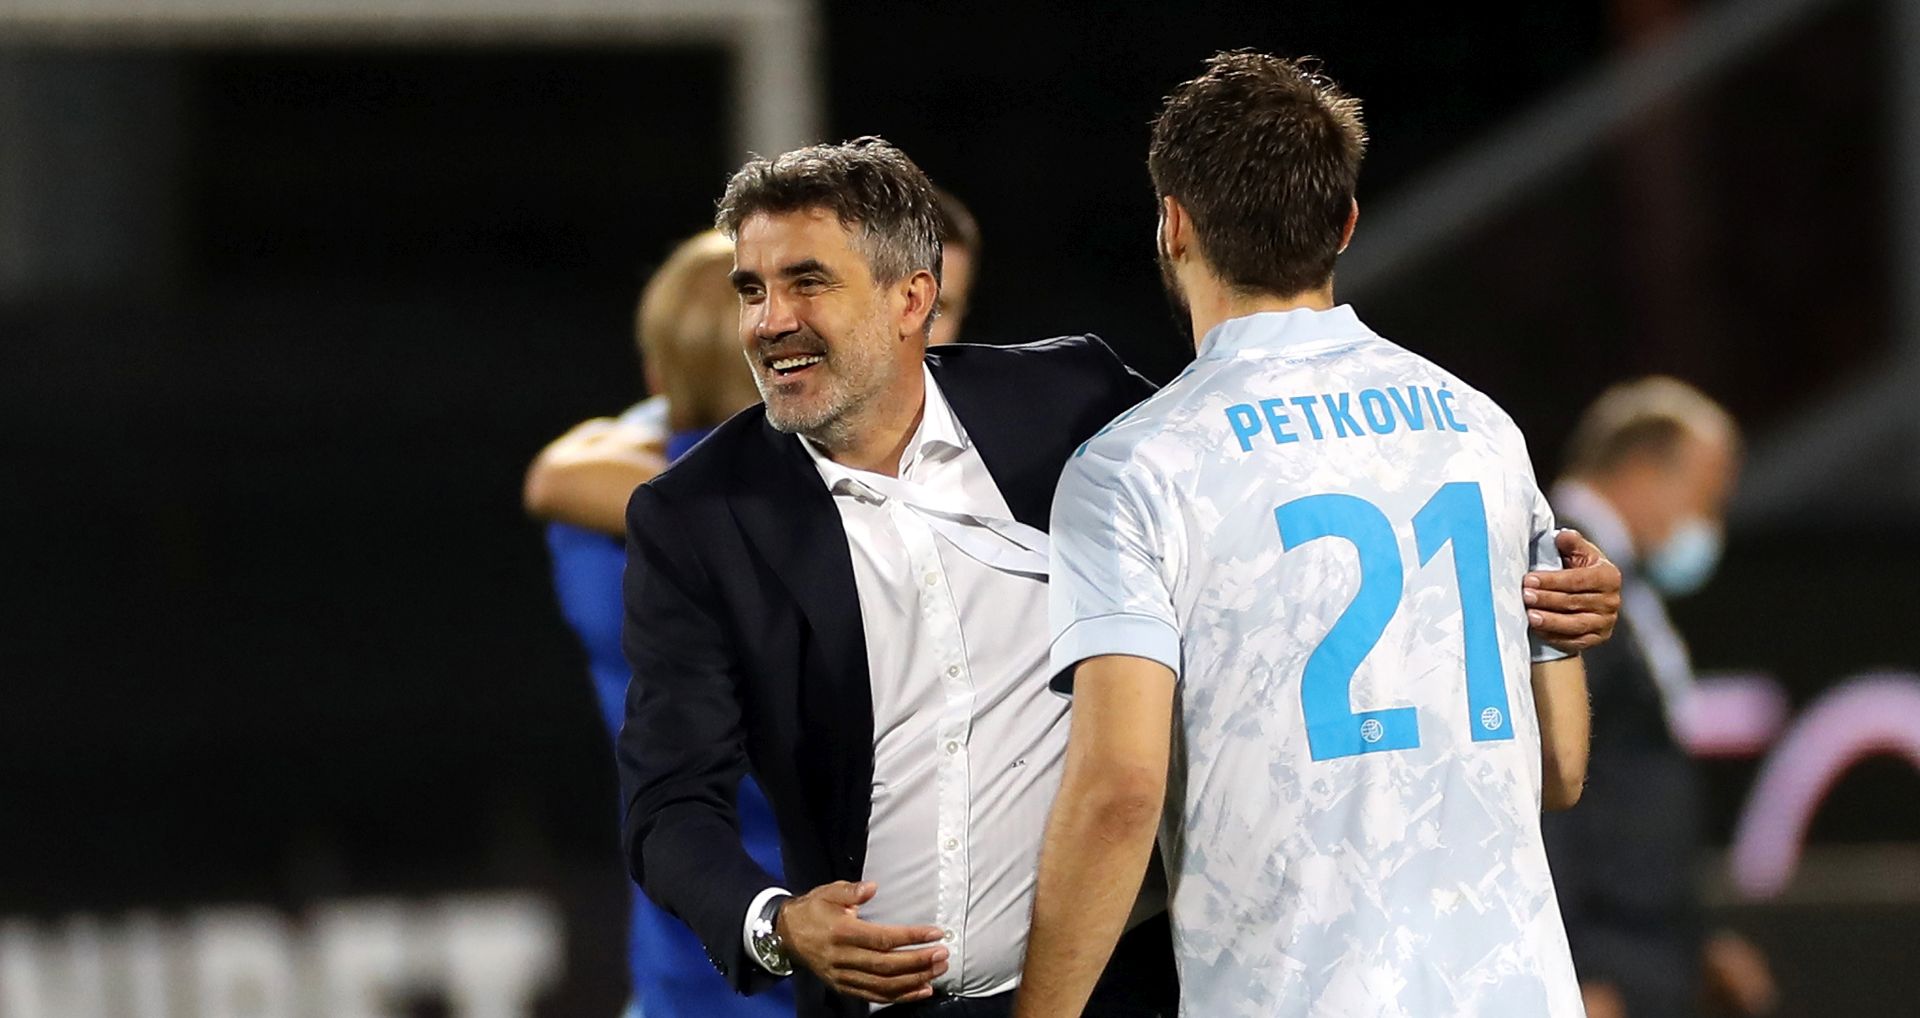 epa08627736 Dinamo Zagreb's head coach Zoran Mamic (L) reacts with his player Bruno Petkovic (R) after winning UEFA Champions League 2nd qualifying round soccer match between CFR Cluj and Dinamo Zagreb, in Cluj Napoca, Romania, 26 August 2020. Dinamo Zagreb won the penalty shoot out 6-5.  EPA/SEBASTIAN TATARU